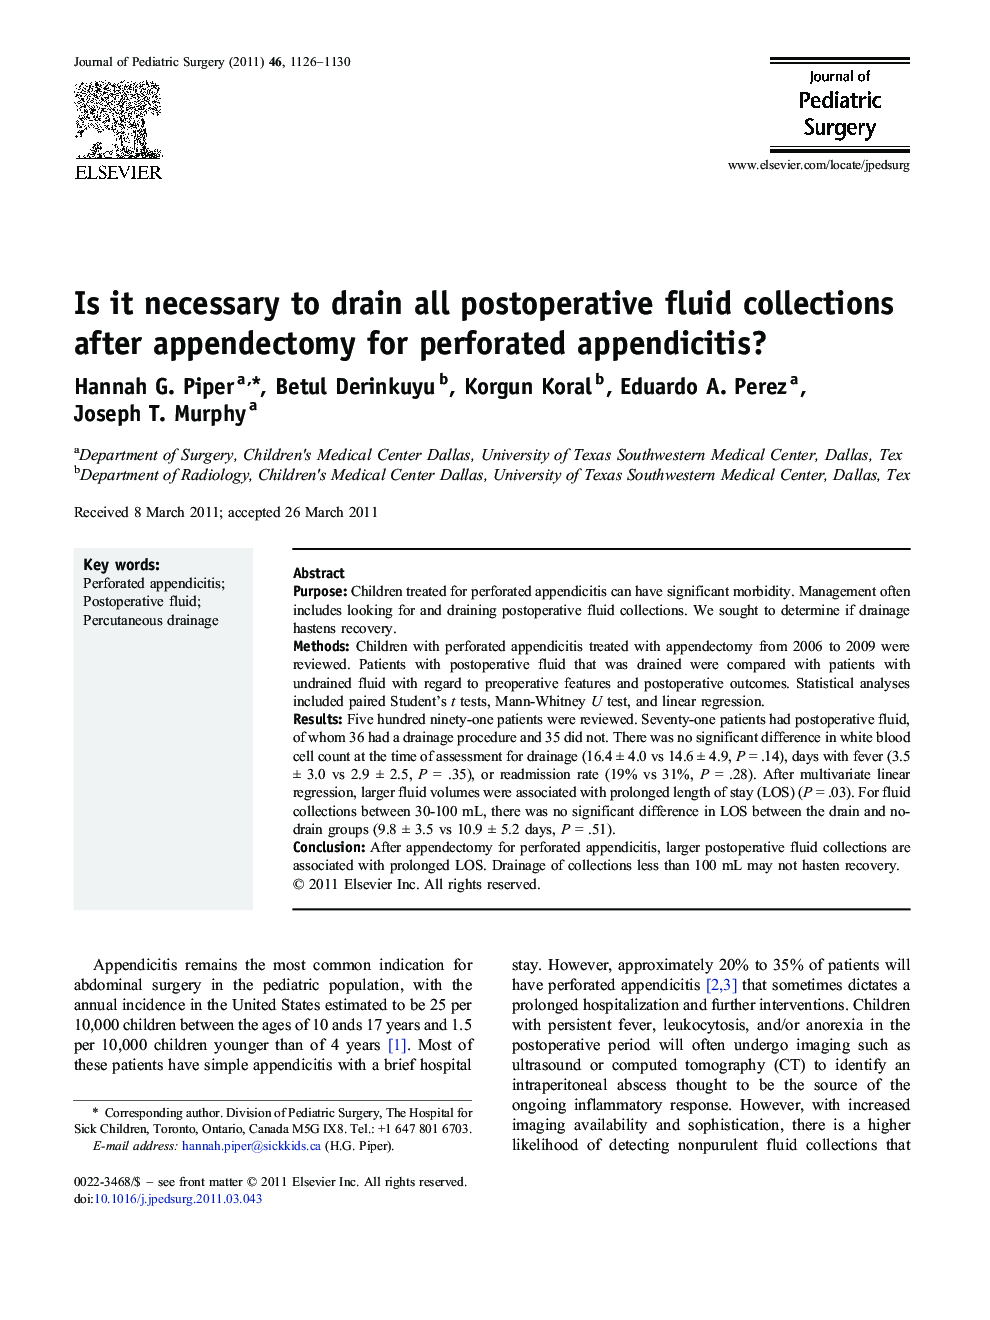 Is it necessary to drain all postoperative fluid collections after appendectomy for perforated appendicitis?